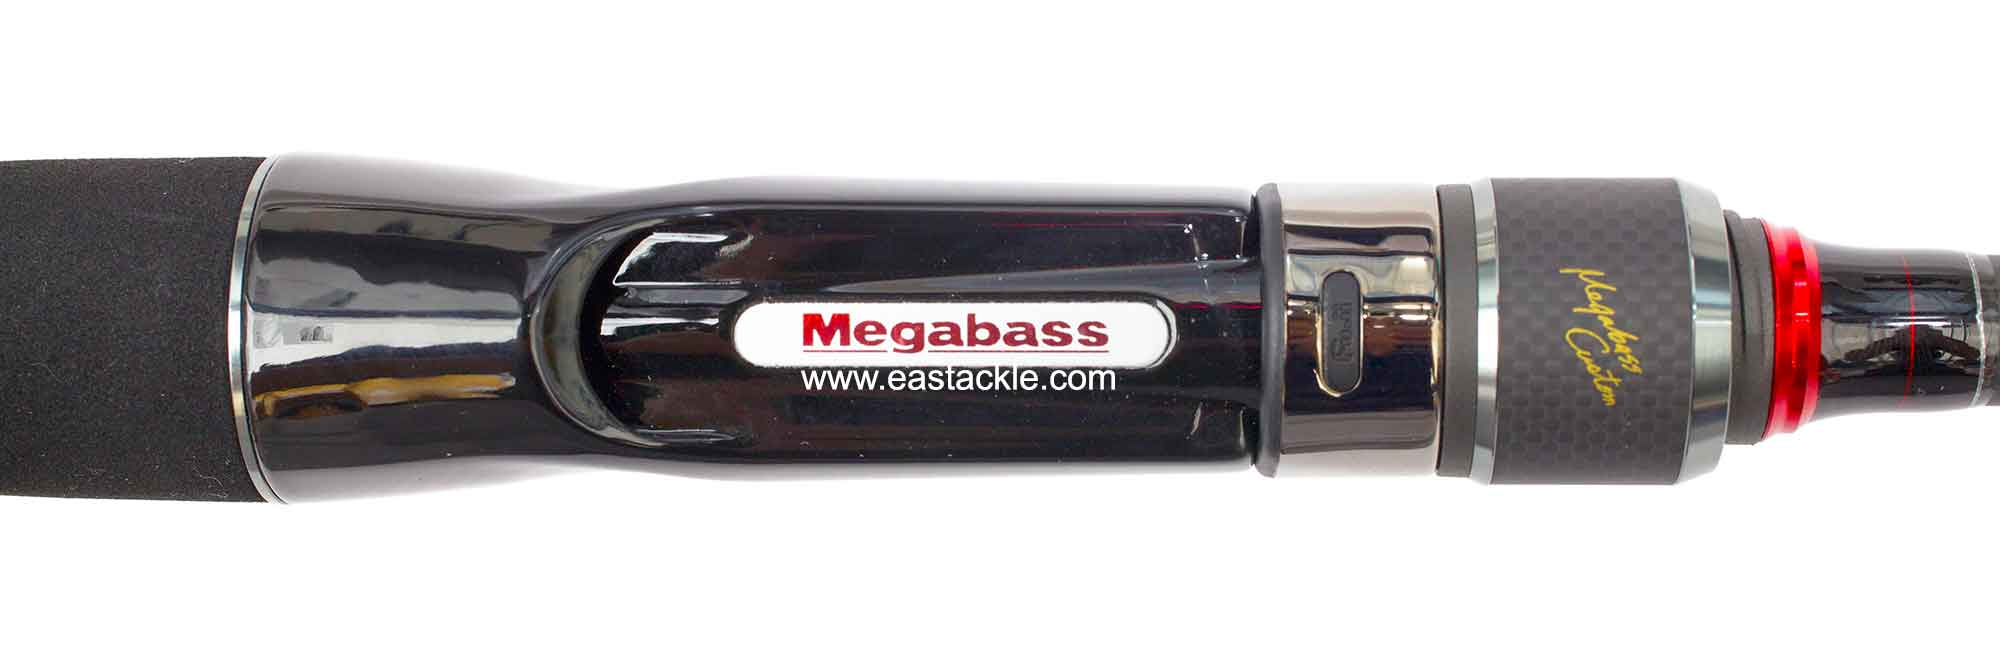 Megabass - Racing Condition World Edition - RCC-762H - Bait Casting Rod - Reel Seat (Top View)